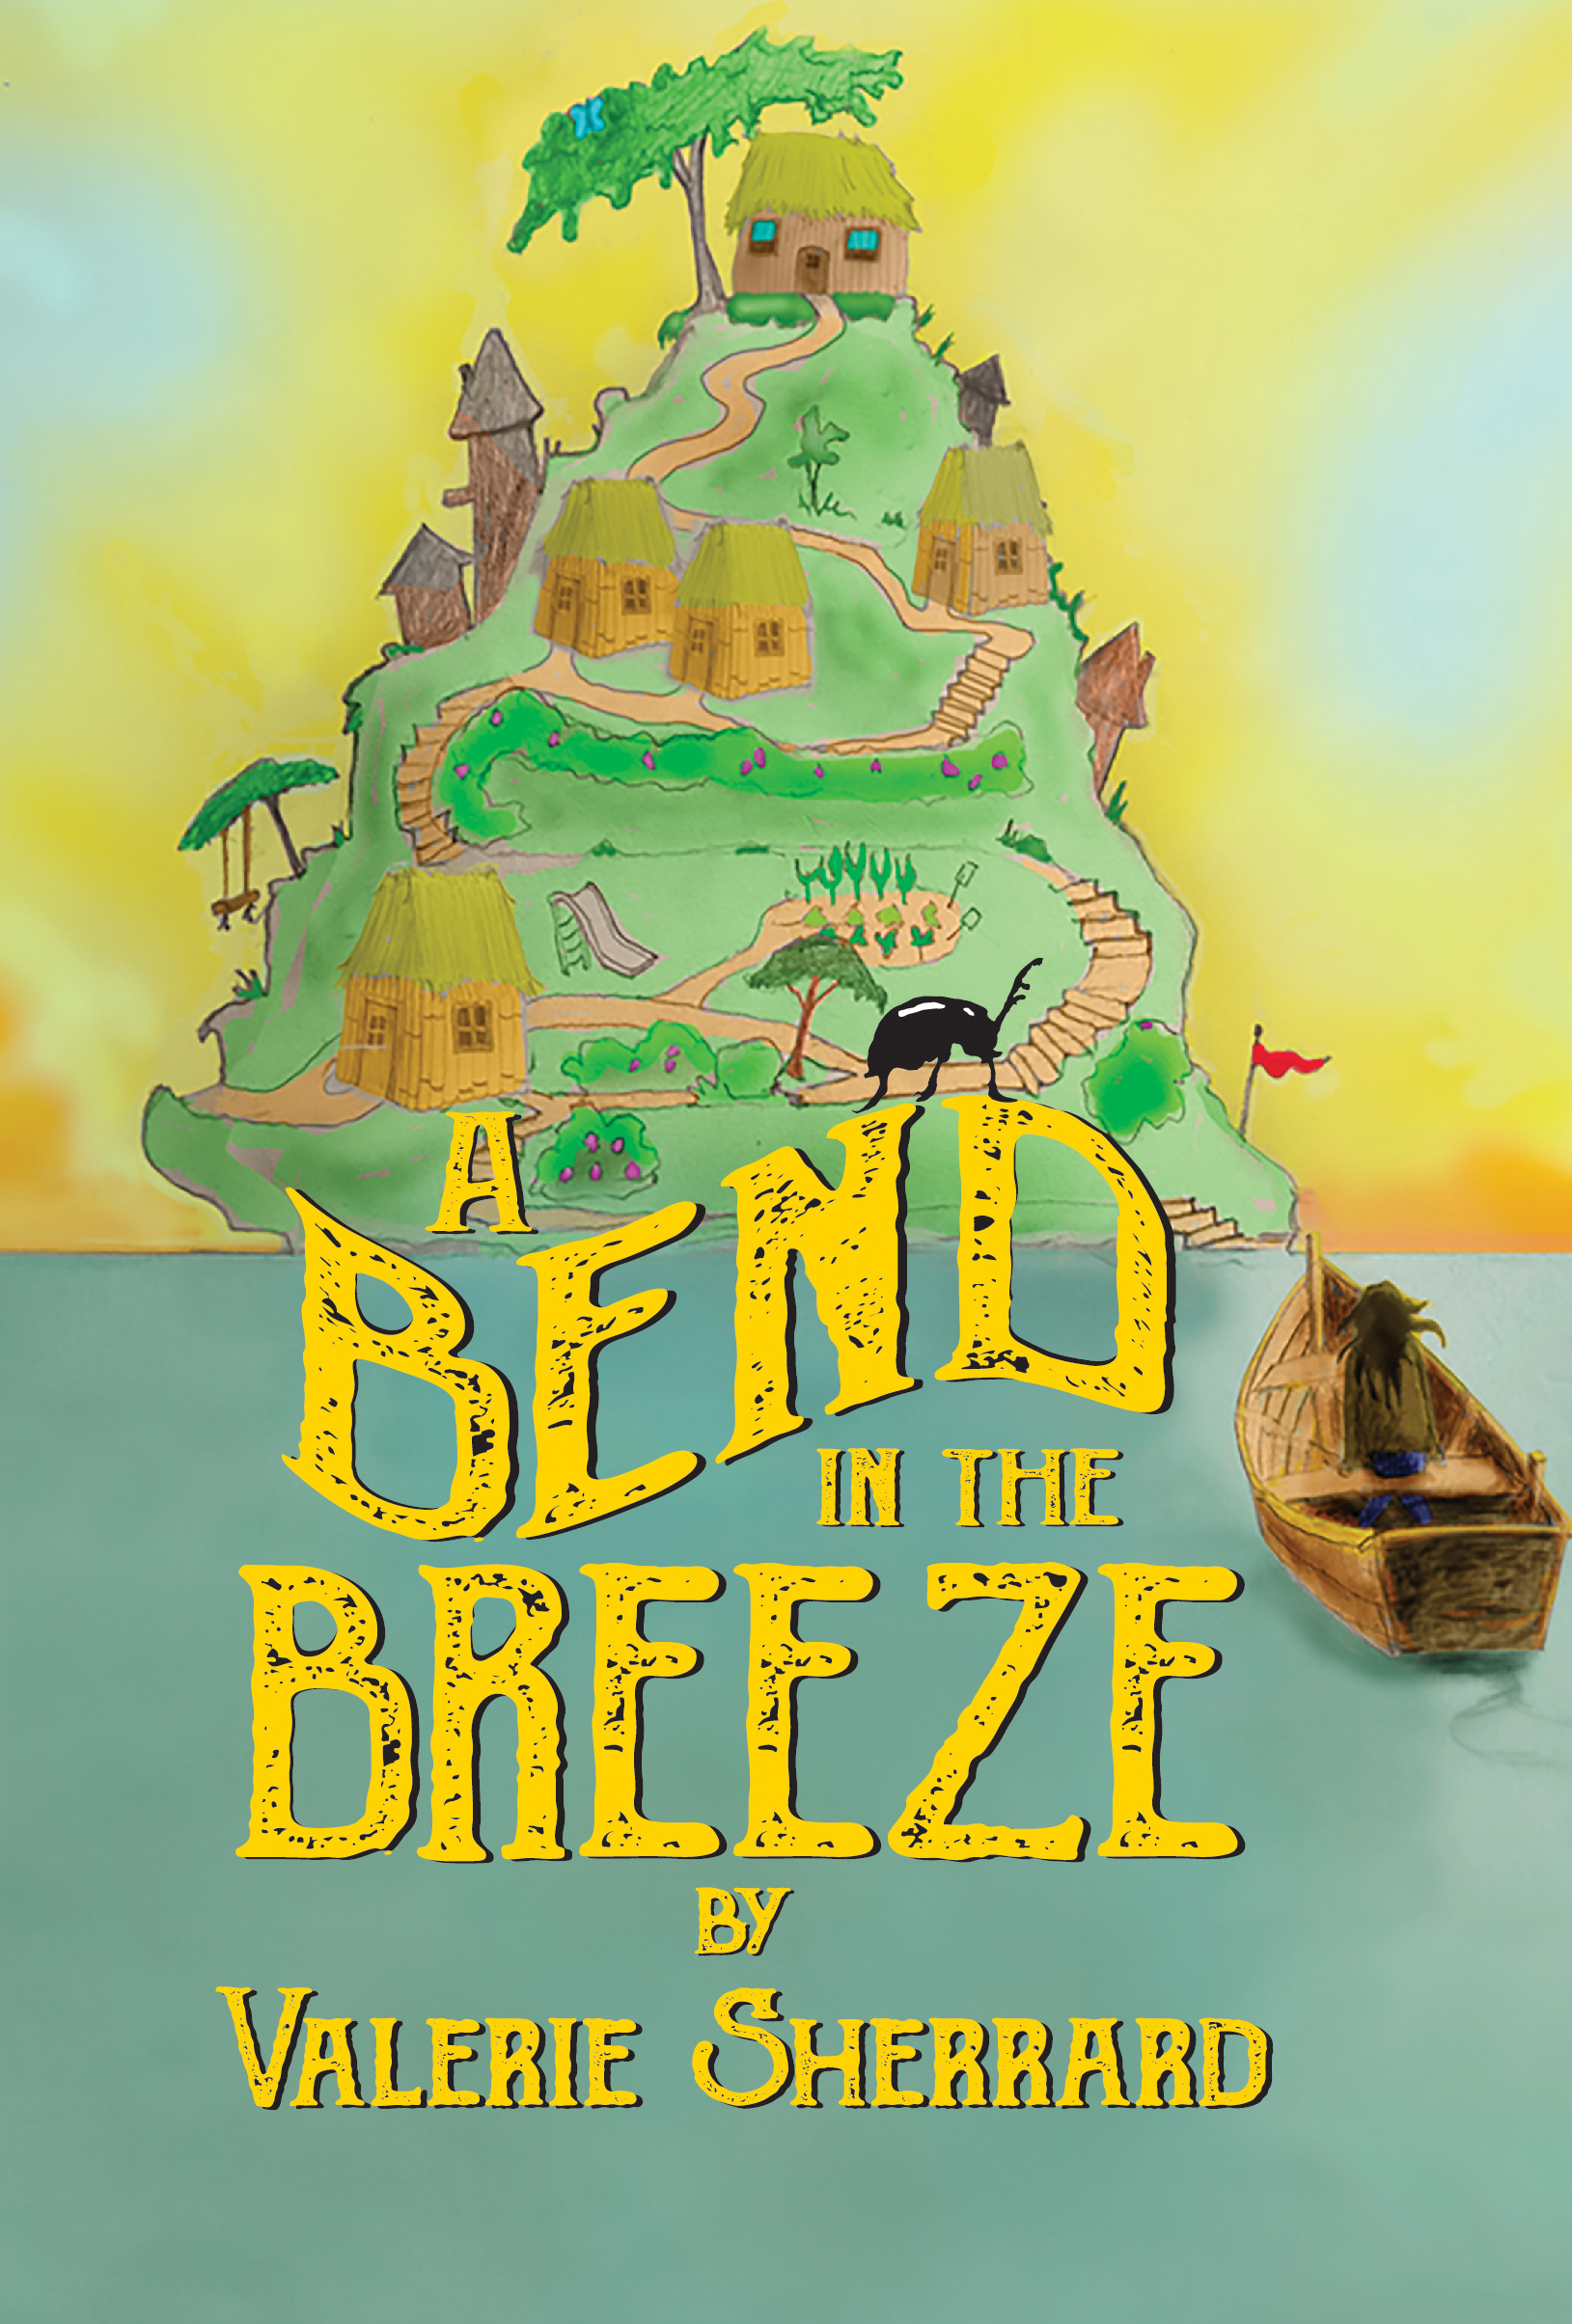 Lisa Doucet Reviews Valerie Sherrard’s A Bend in the Breeze